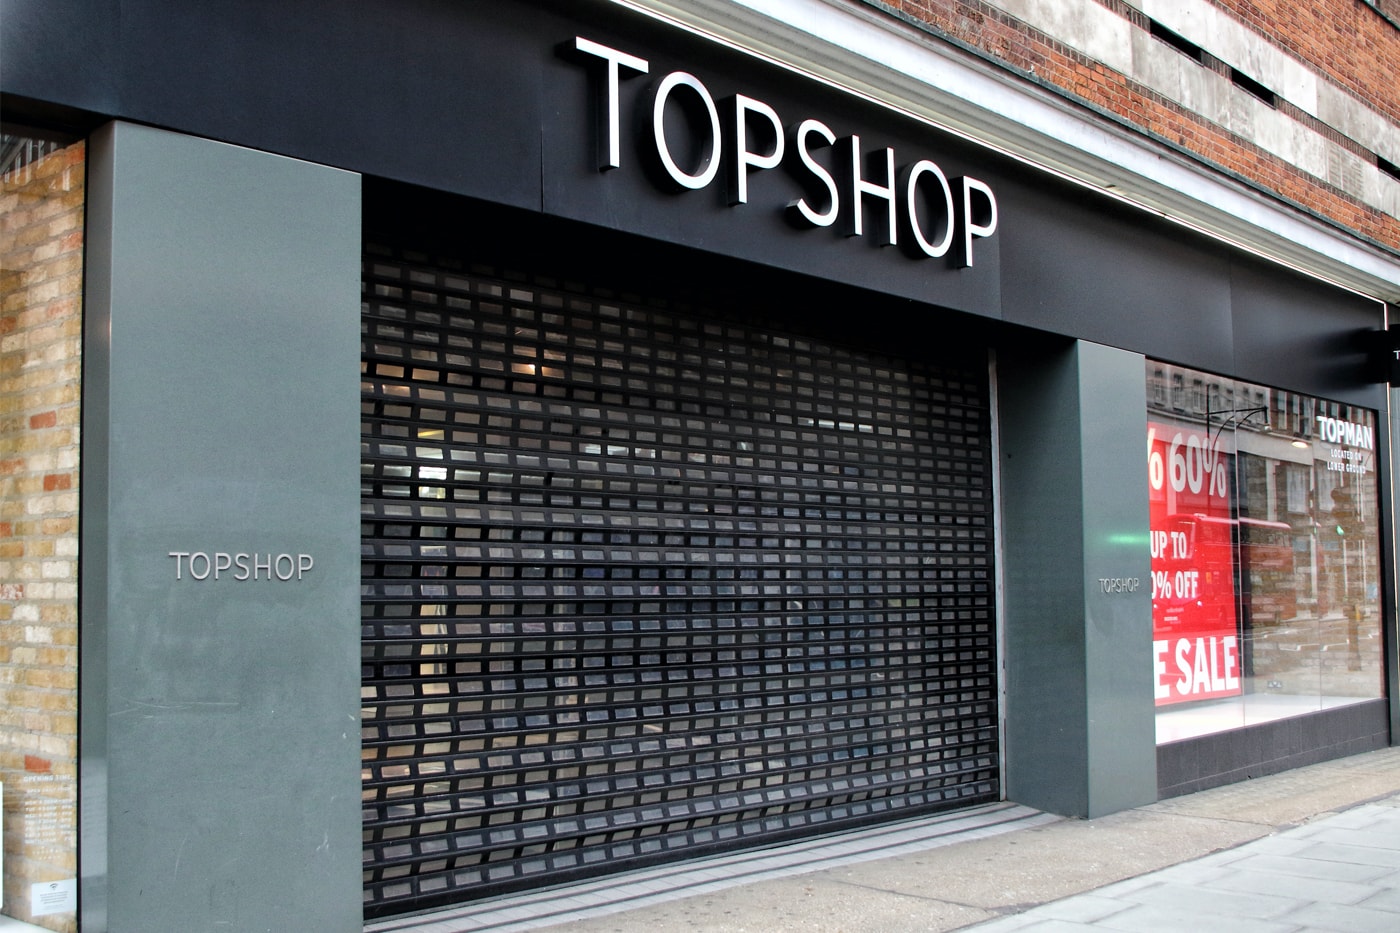 ASOS Buys Topshop and Affiliates $405M USD Deal Topman, Miss Selfridge HIIT Arcadia Group Business of Fashion Acquisition E-commerce